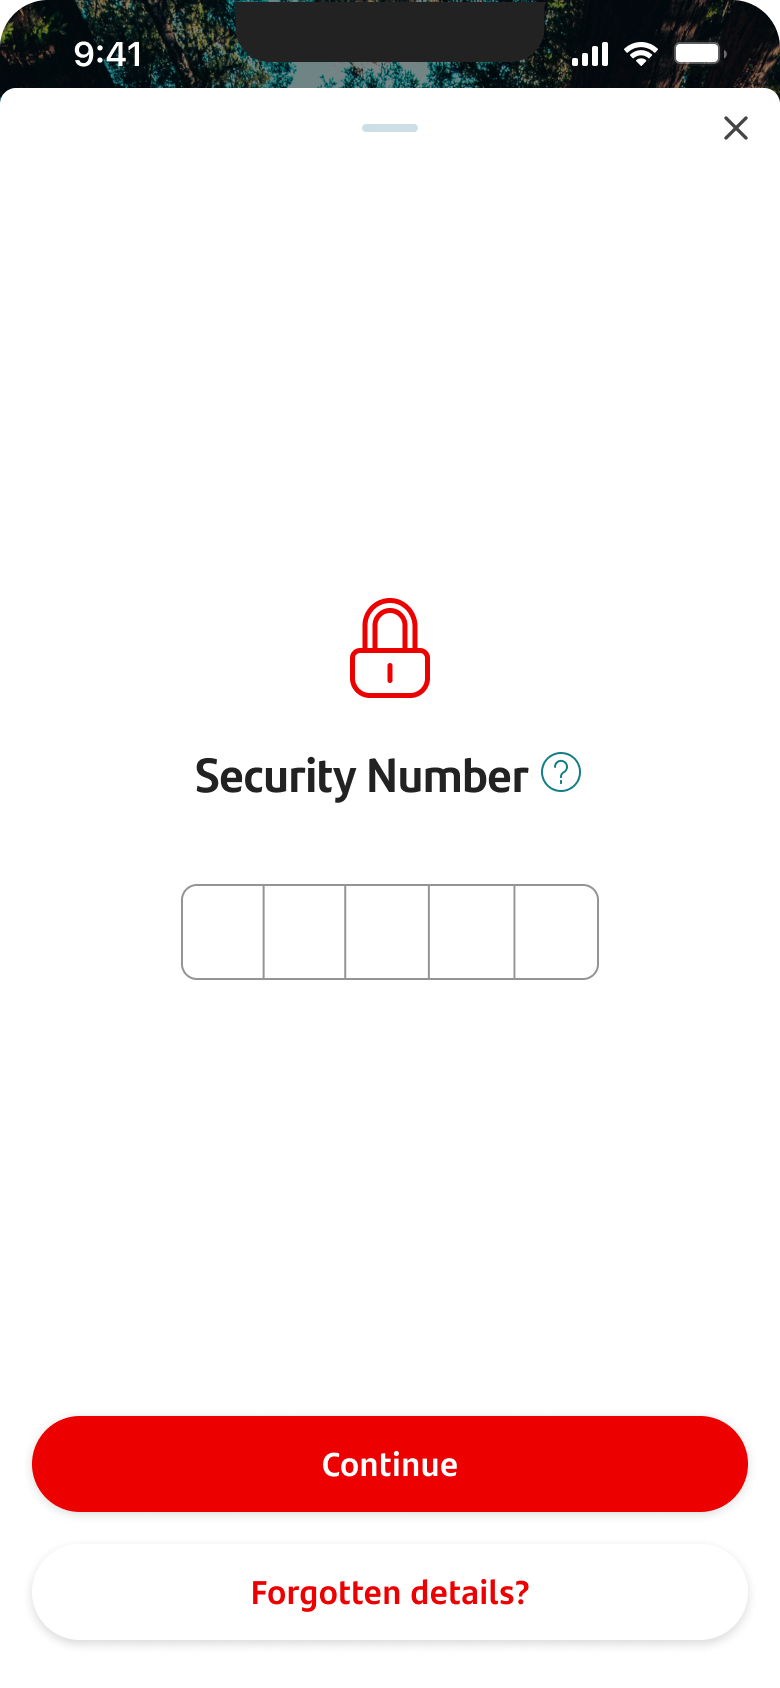 Screen for customer to enter their Security Number